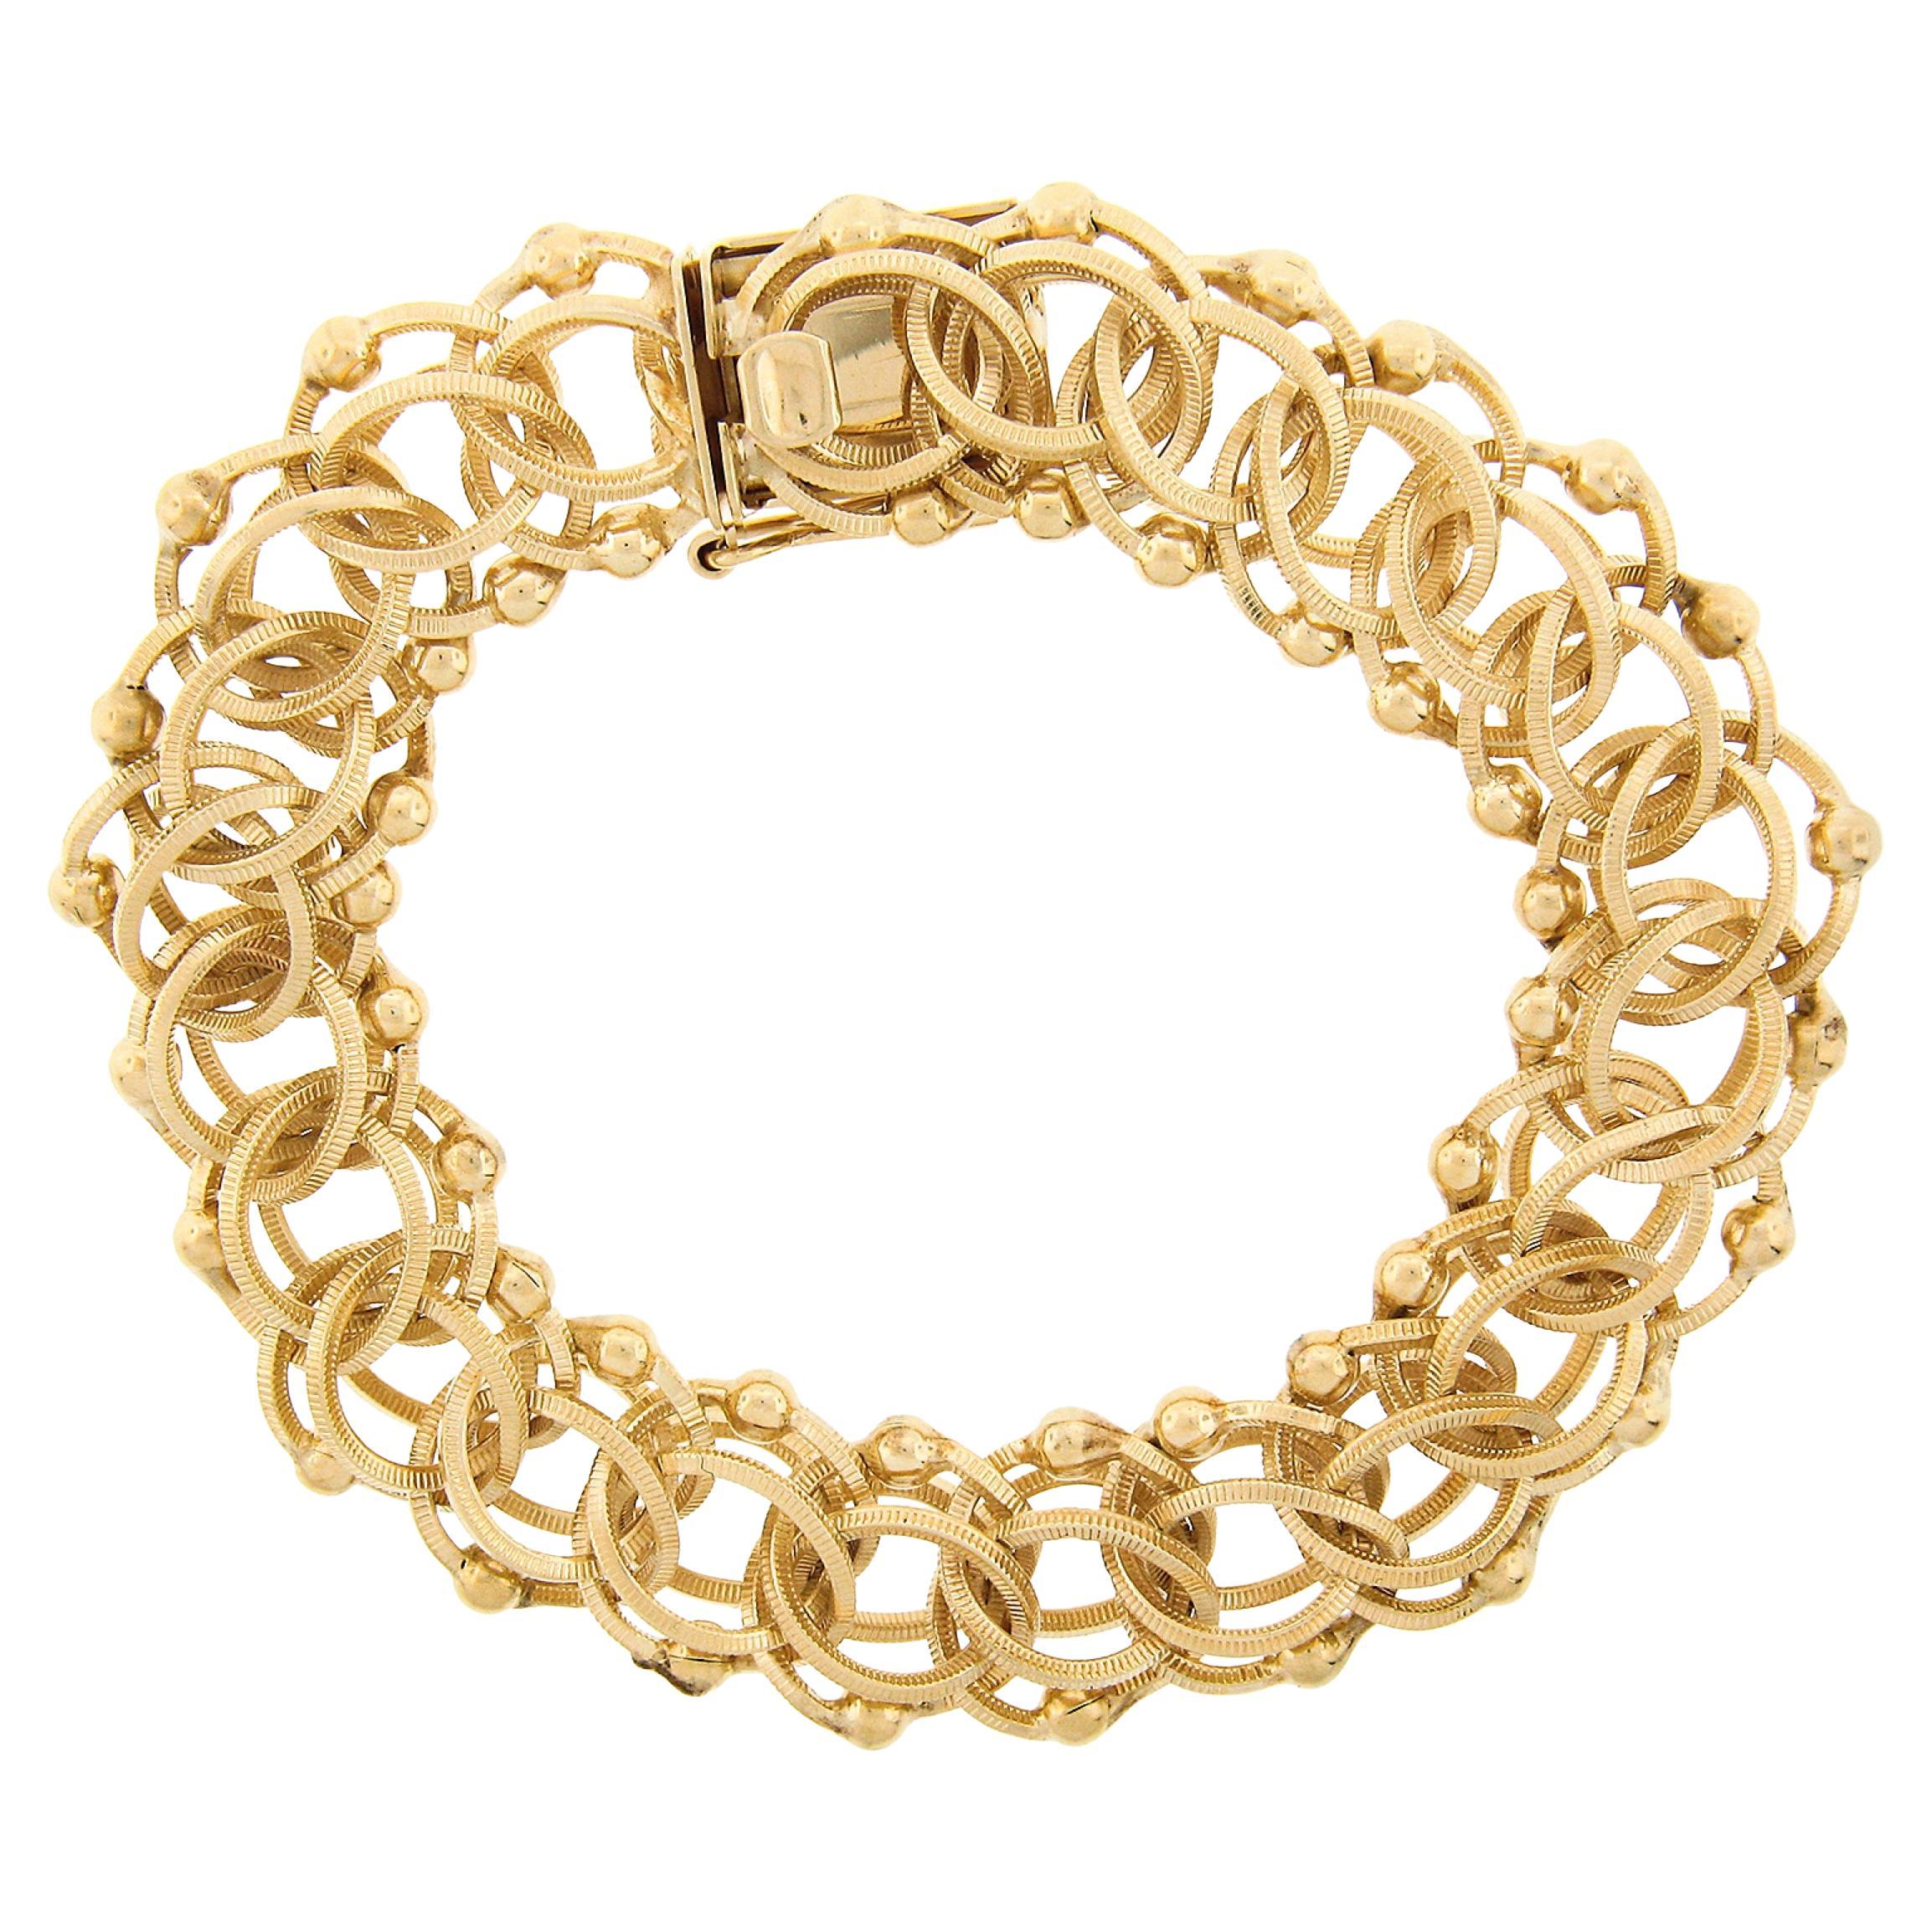 Vintage 14K Gold 6.25" Textured Double Ring Link Puffed Charm Chain Bracelet For Sale